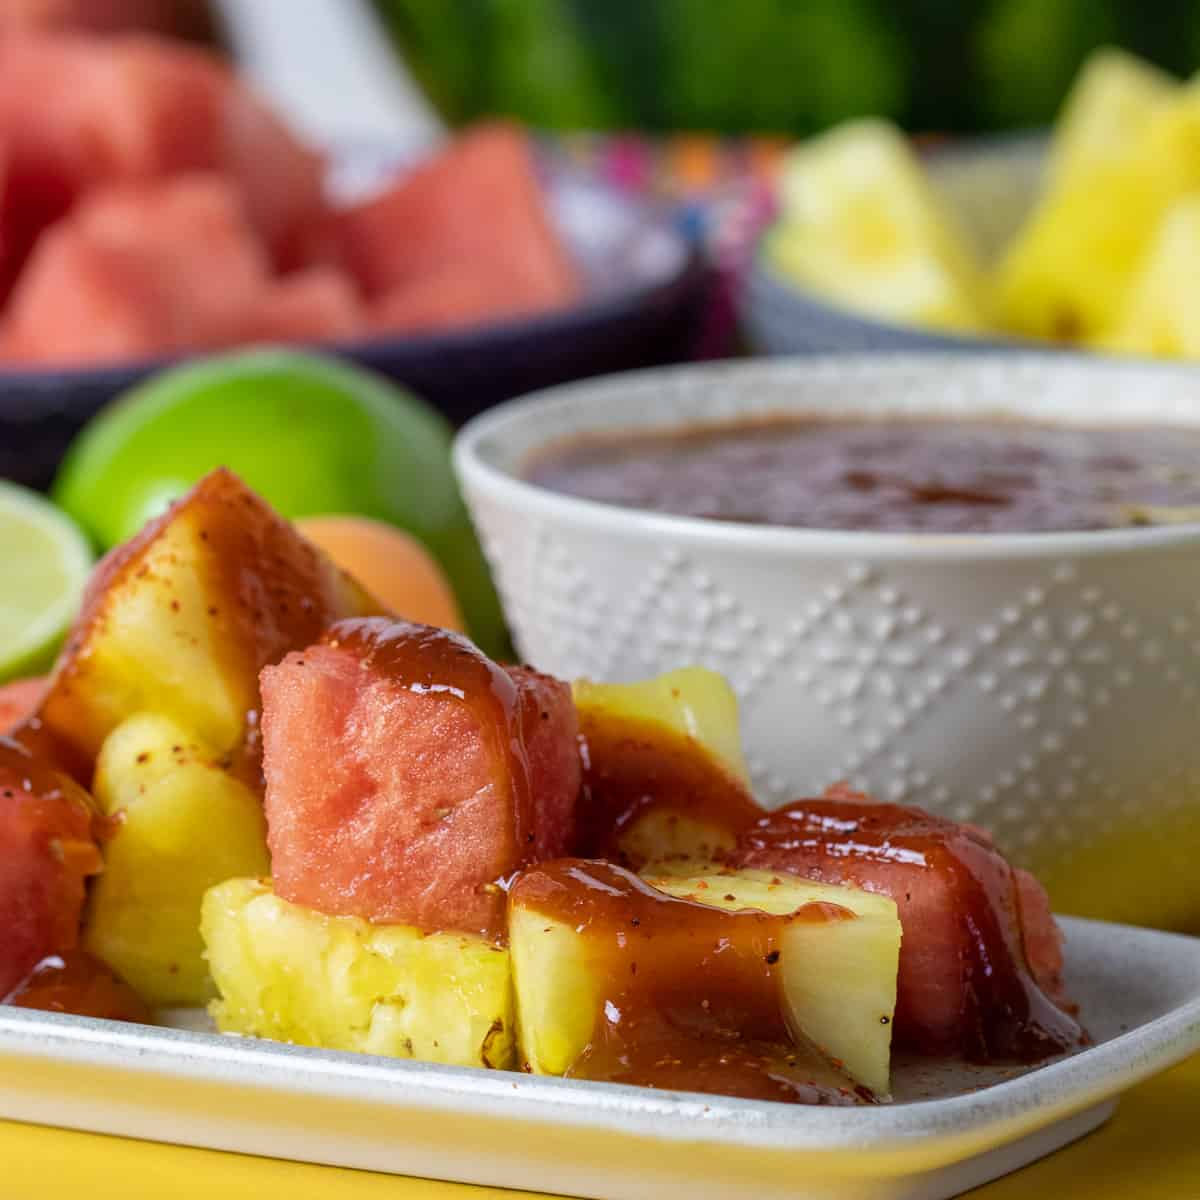 Close up picture of cut watermelon and pineapple with sauce poured all over them.